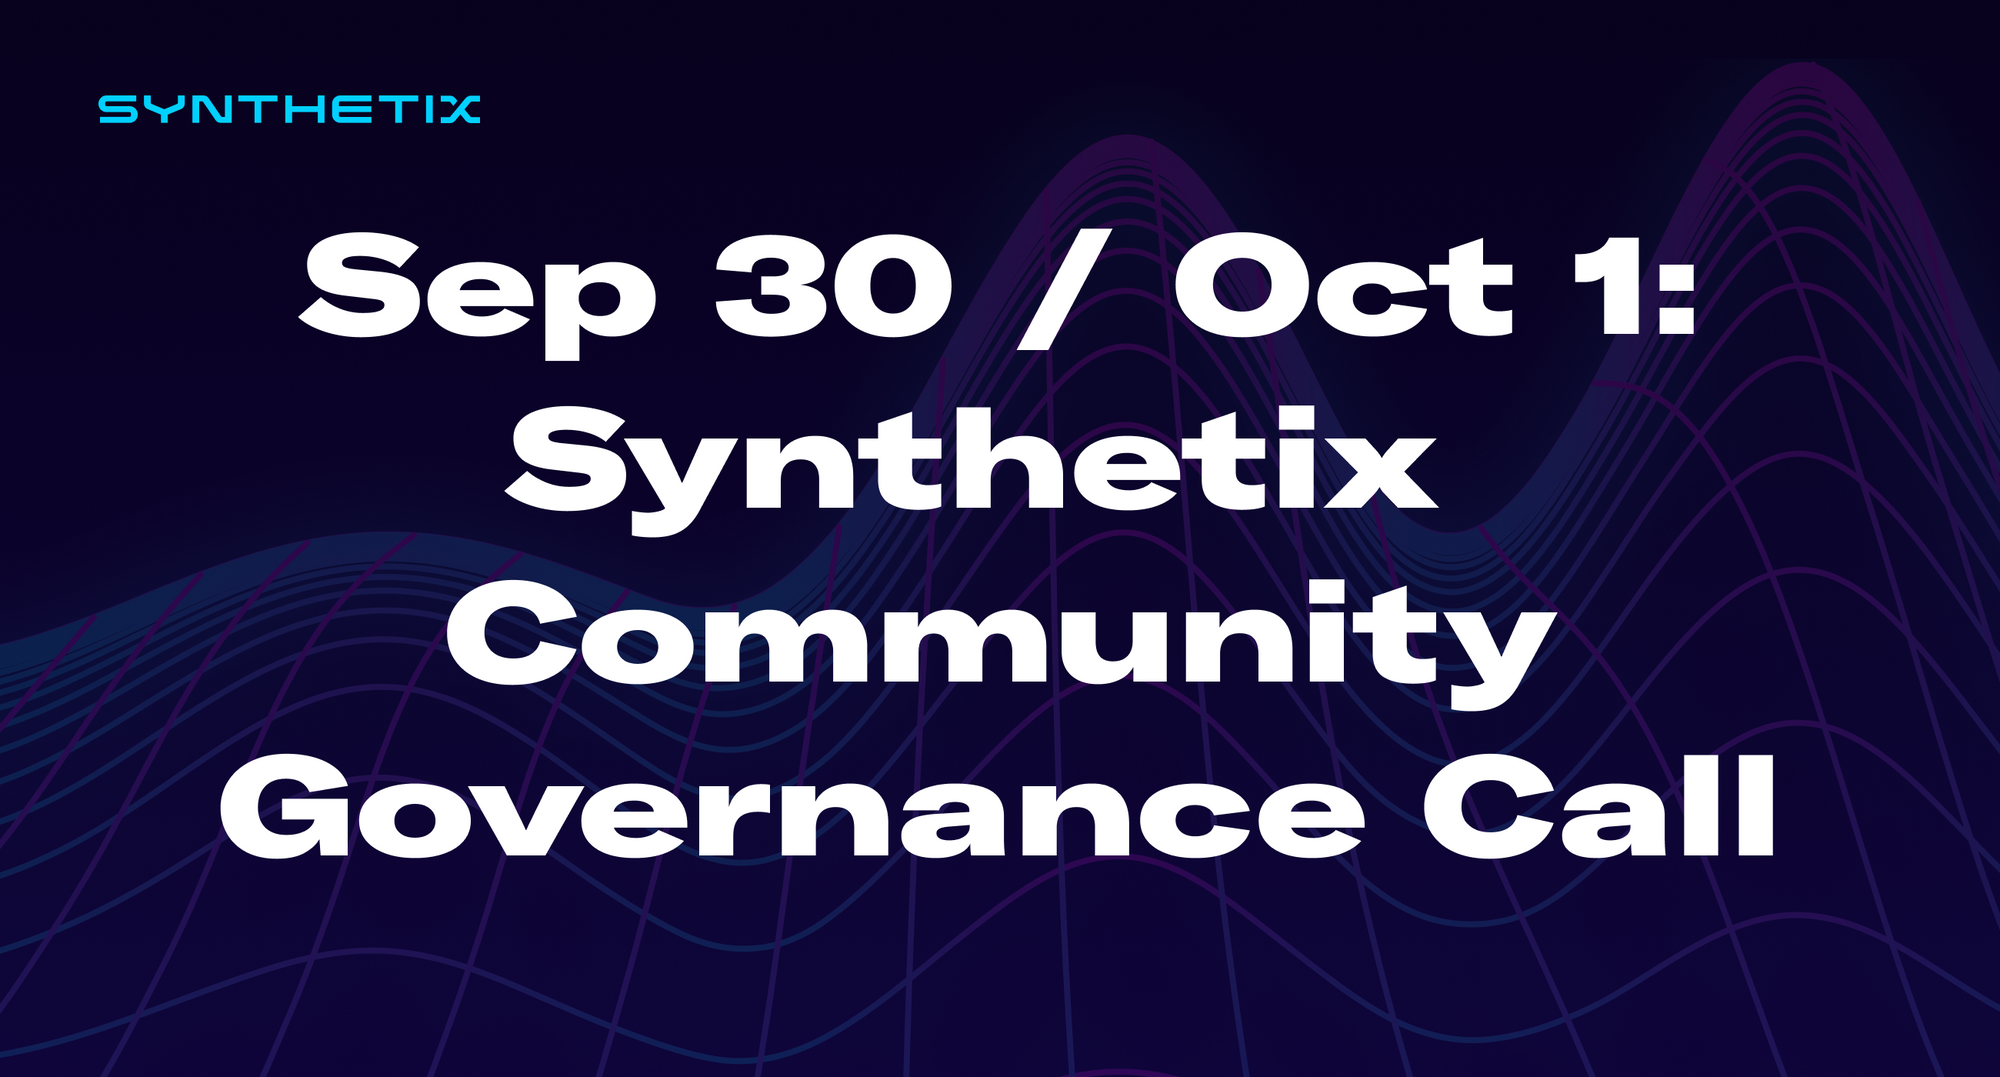 Come join us on Sep 30 / Oct 1 for the next Synthetix community governance call!